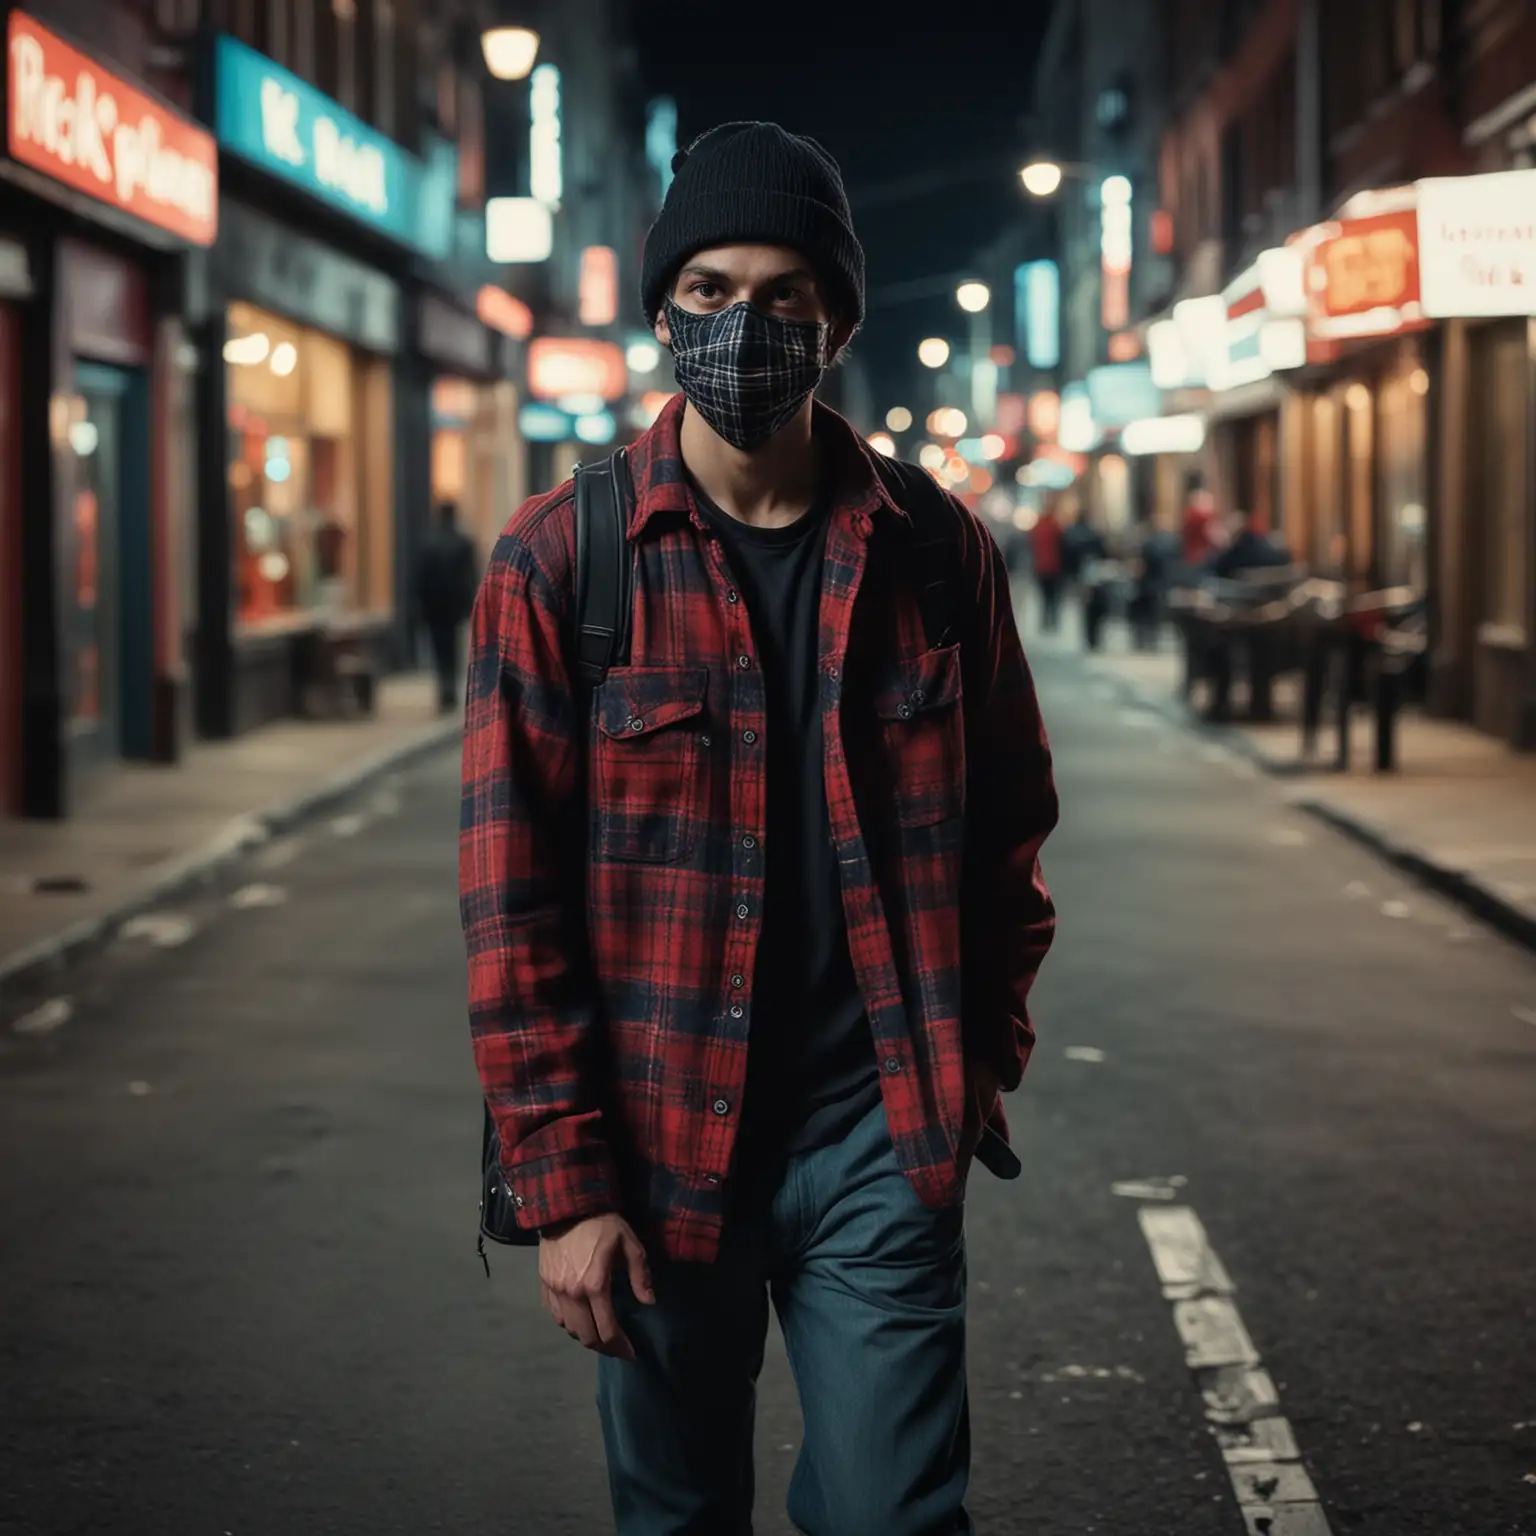 A full body potrait young man with black plaid shirt and cargo khaki pants, black sneakers, wearing black beanie, black mask, walks through a neon-lit urban city street at night, he looking around, holding a DSLR camera in his hand, his expression a mix of determination and nonchalanc, candid view.  

[Photorealistic, street photography, inspired by the work of  Vivian Maier and Henri Cartier-Bresson], [Shallow depth of field, blurred background, cool blue and red tones, grain, film texture, nighttime city setting]